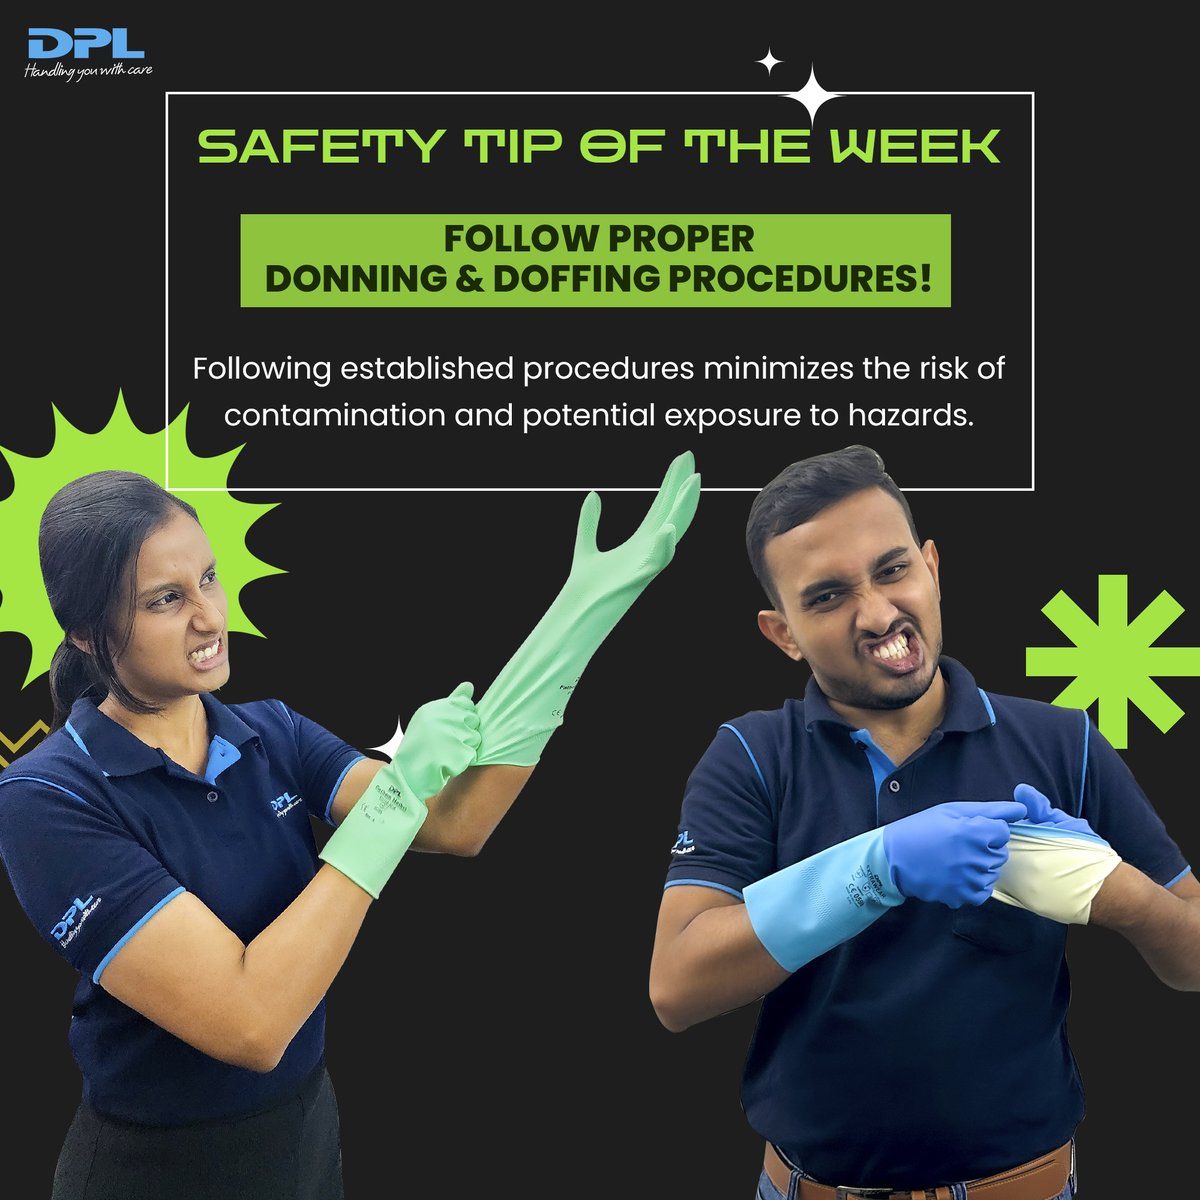 This week's #SafetyTipoftheWeek: Follow proper Donning & Doffing procedures!

Did you know that simply wearing gloves isn't enough? Proper Donning (putting on) and Doffing (taking off) procedures are essential for comprehensive hand protection. 

#WorldDayForSafetyAndHealthAtWork